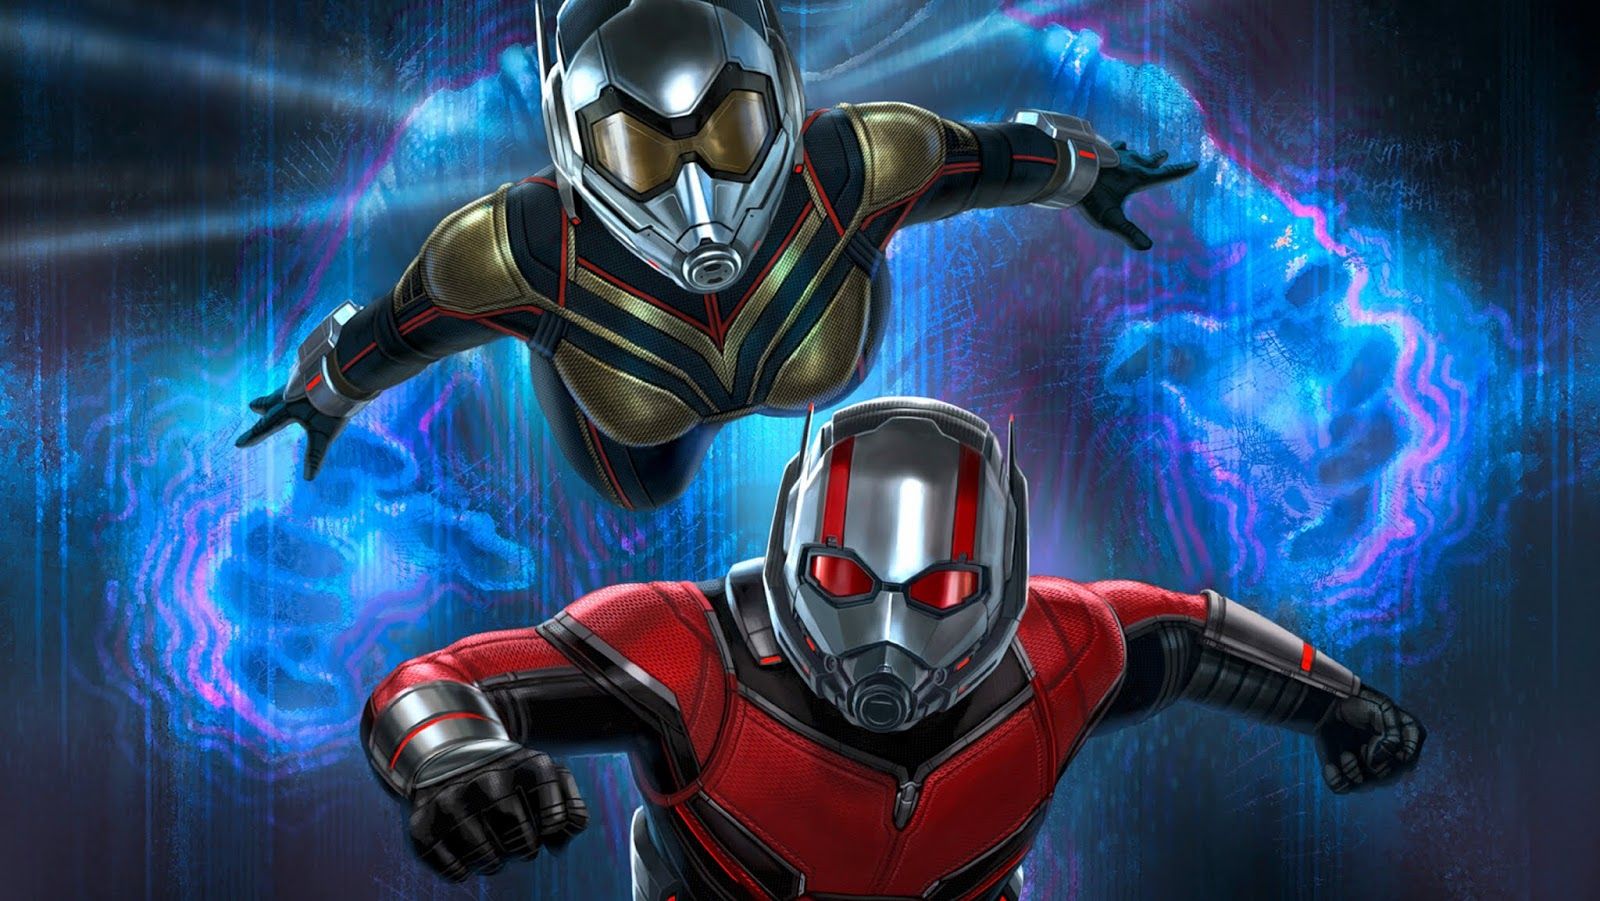 Wallpaper. Image. Picpile: Ant Man And The Wasp HD Wallpaper